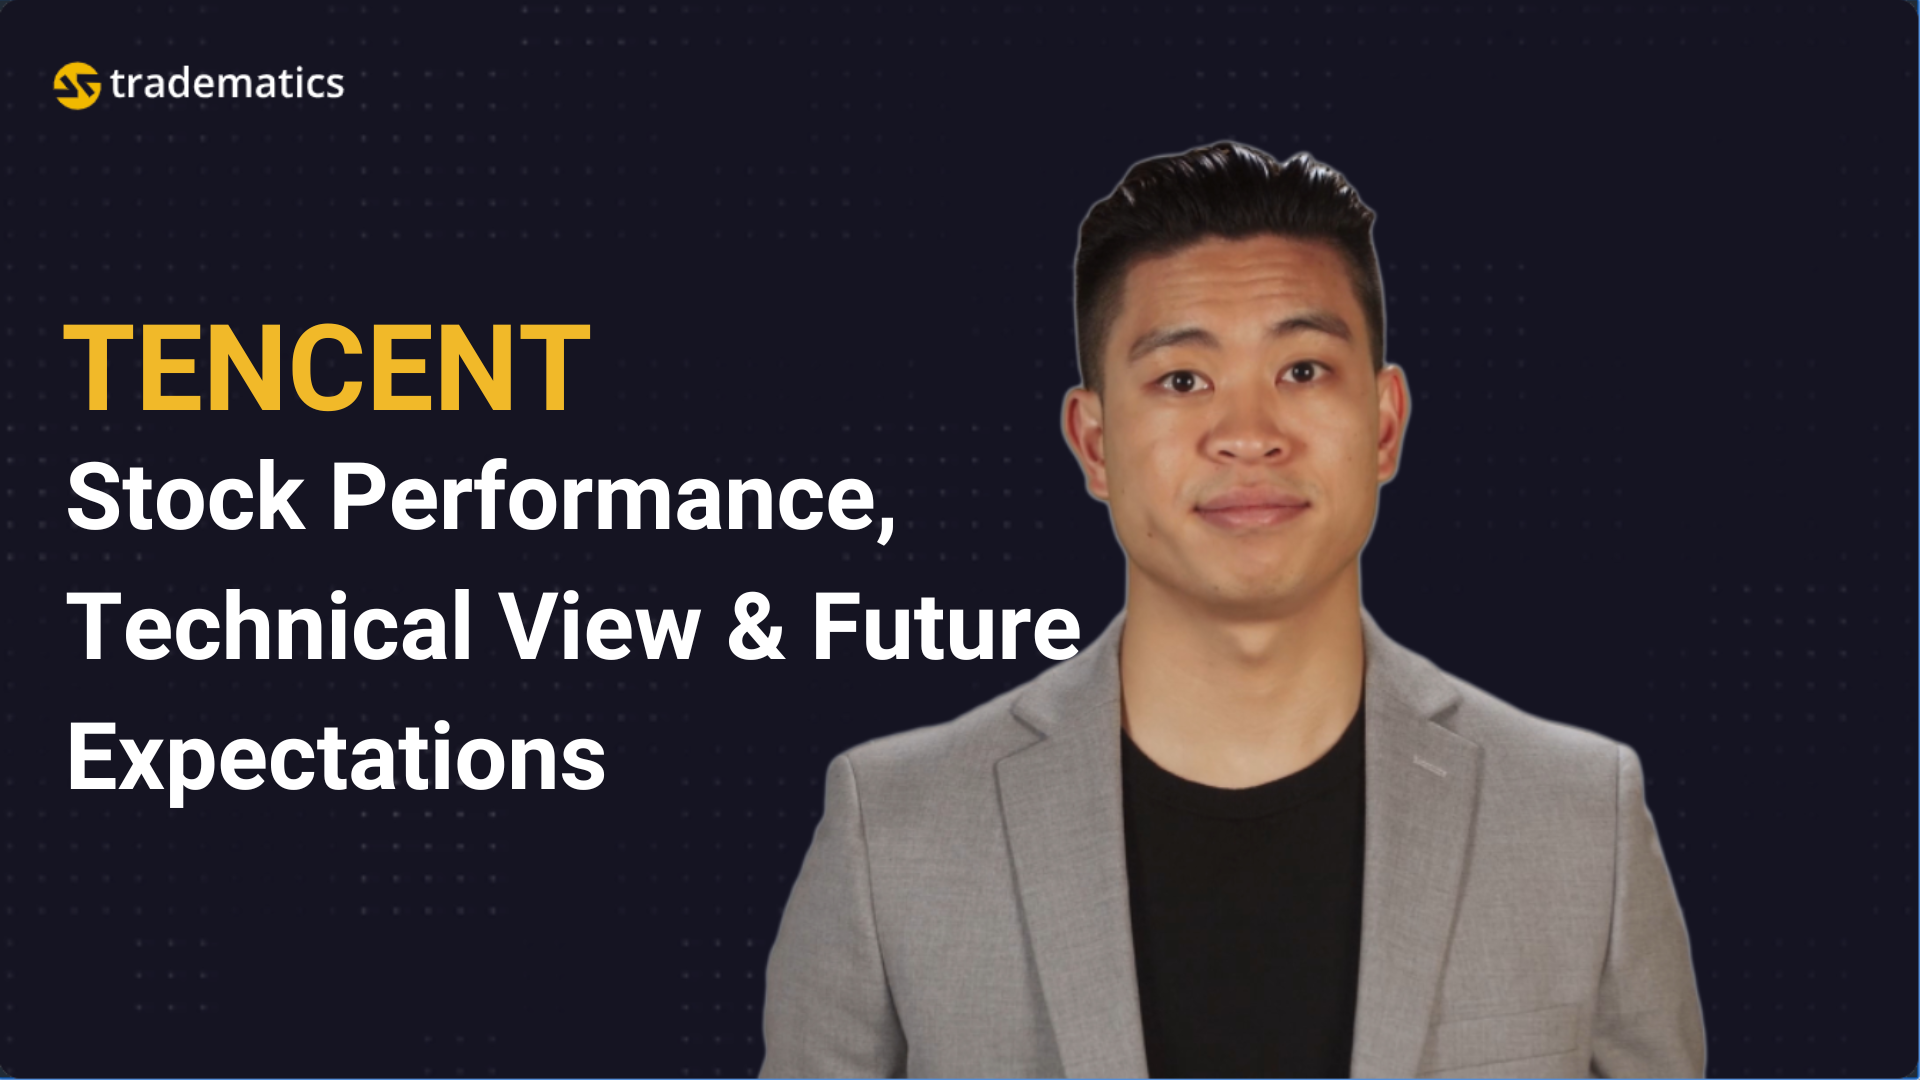 Tradematics | #11 TENCENT | Stock Performance, Technical View & Future Expectations